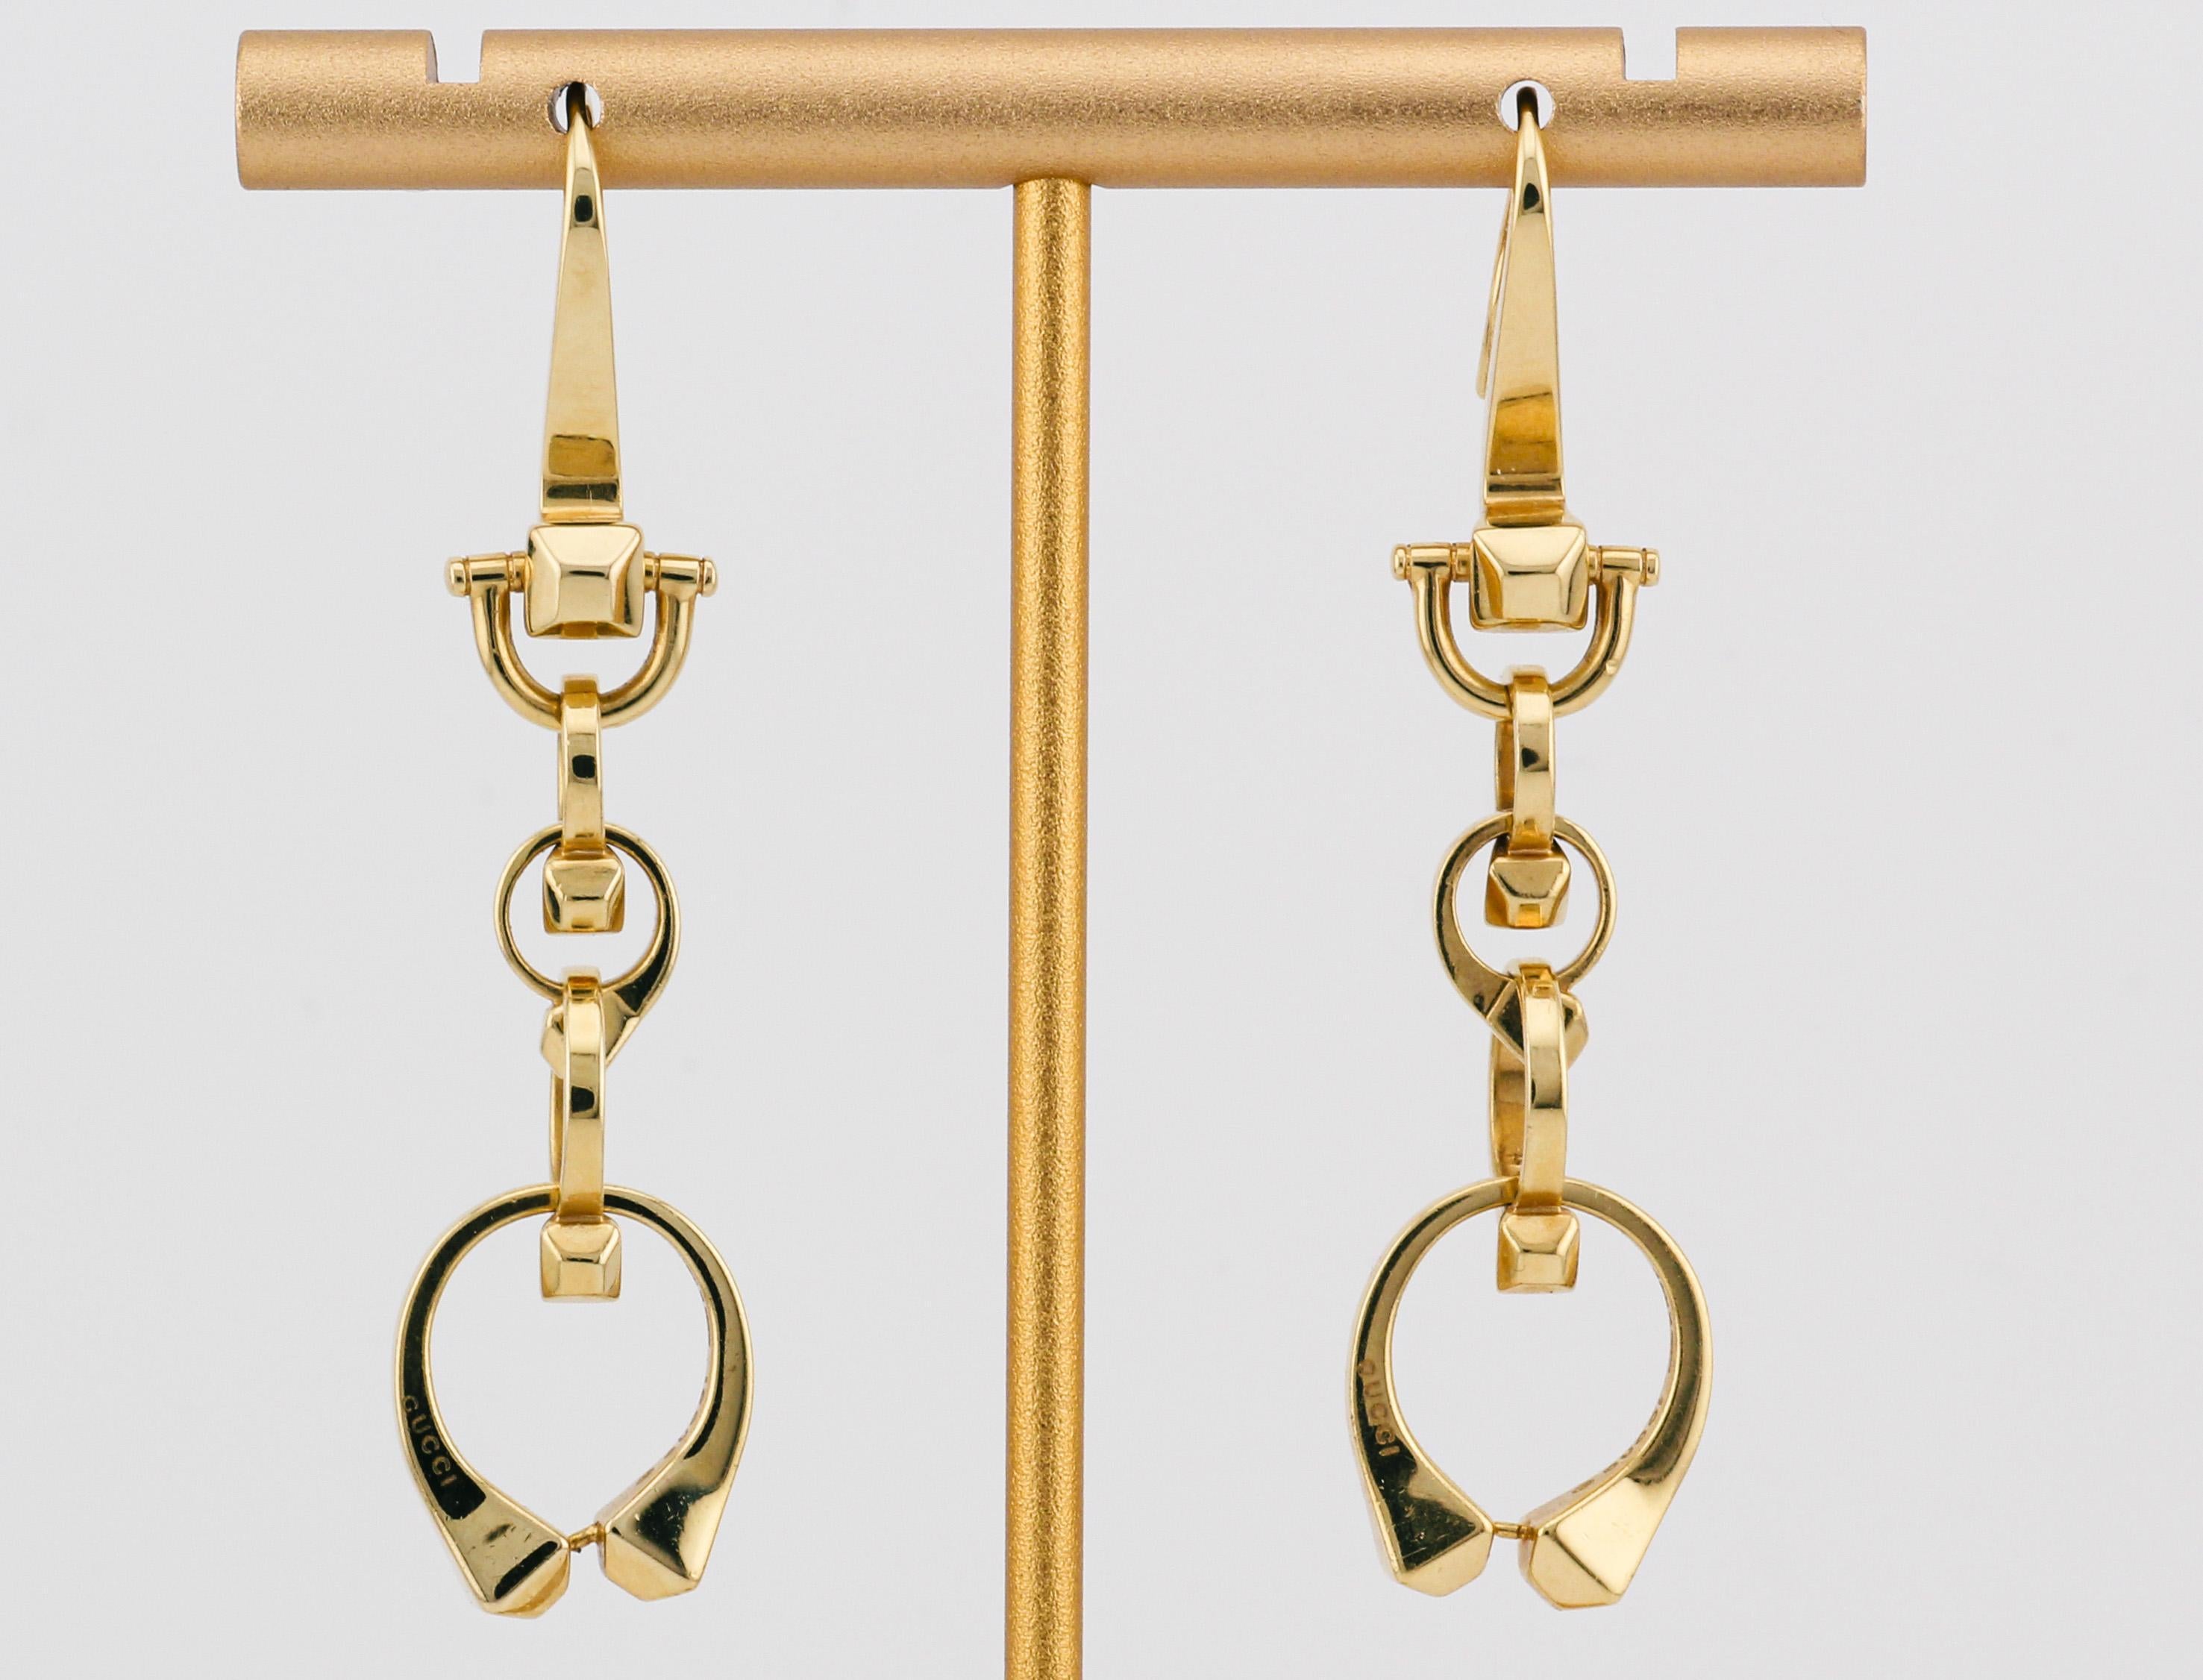 The Gucci Chiodo 18K Yellow Gold Drop Earrings are a stunning representation of bold elegance and contemporary sophistication. Inspired by the iconic Chiodo collection, these earrings feature interlocking nails crafted from luxurious 18K yellow